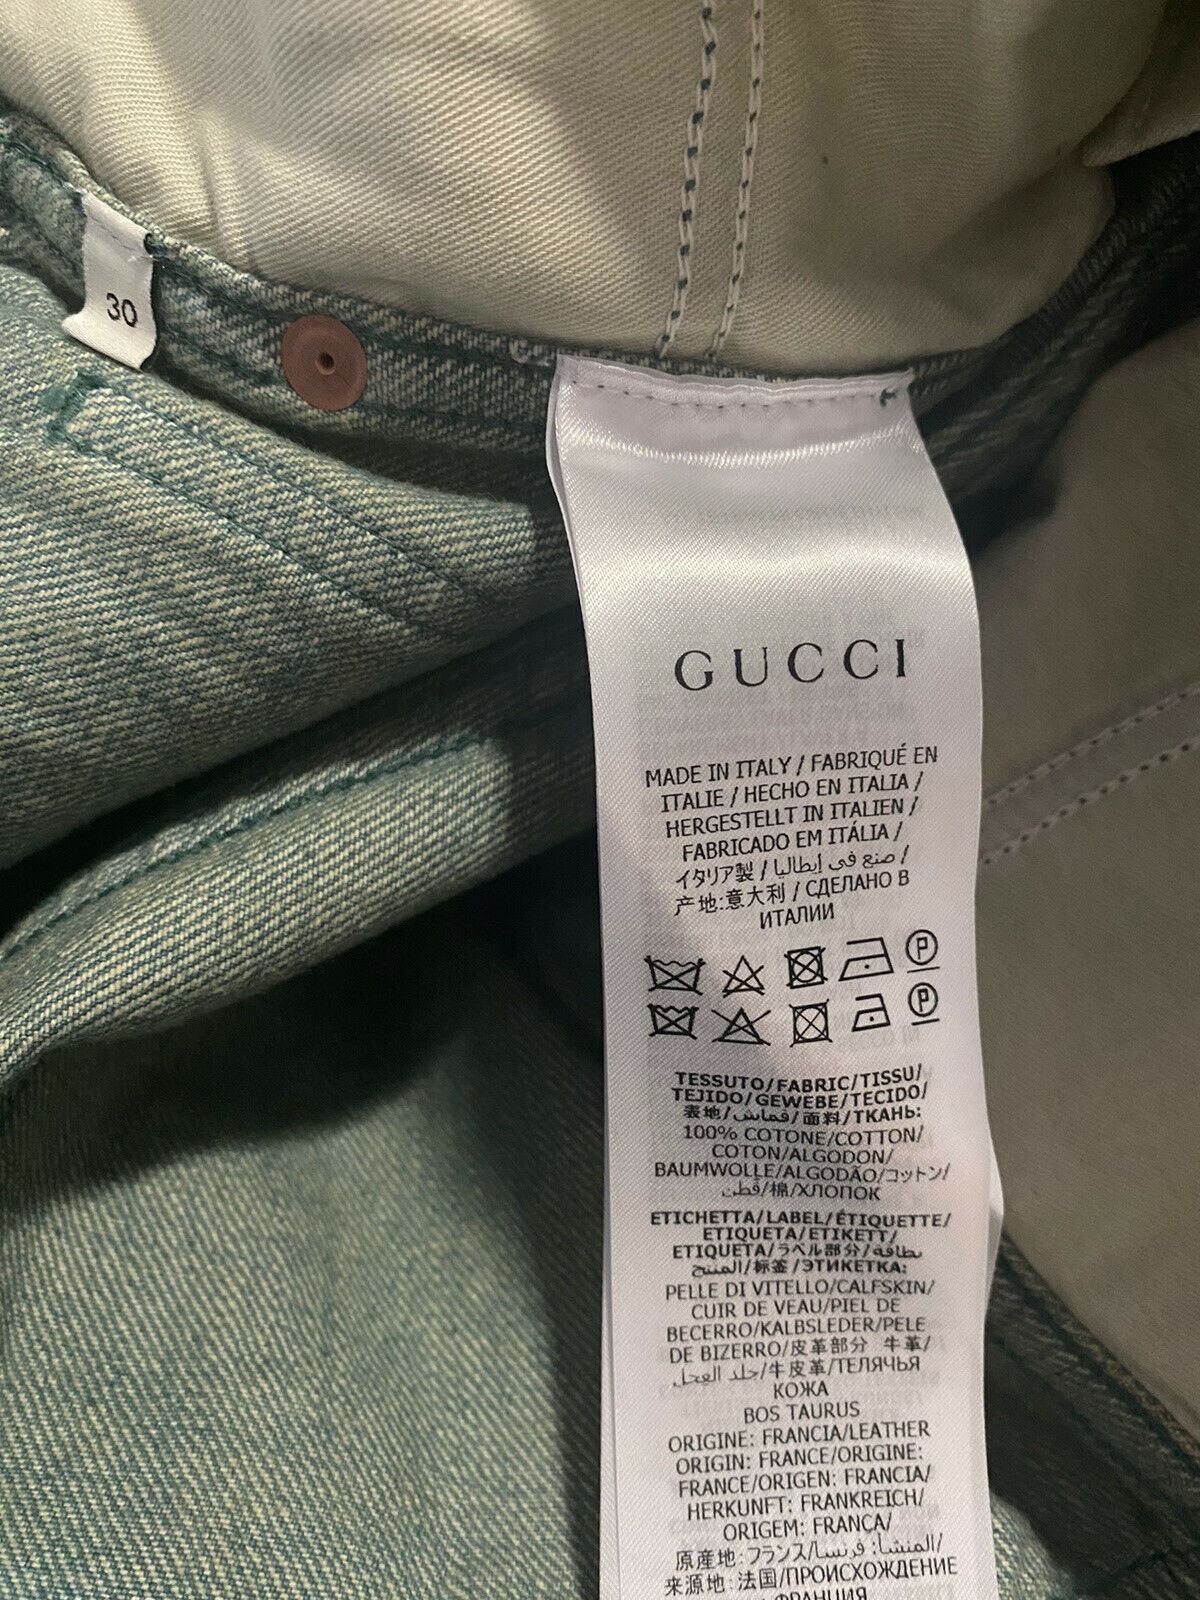 NWT $1450 Gucci Men’s Jeans Pants Green Size 30 US